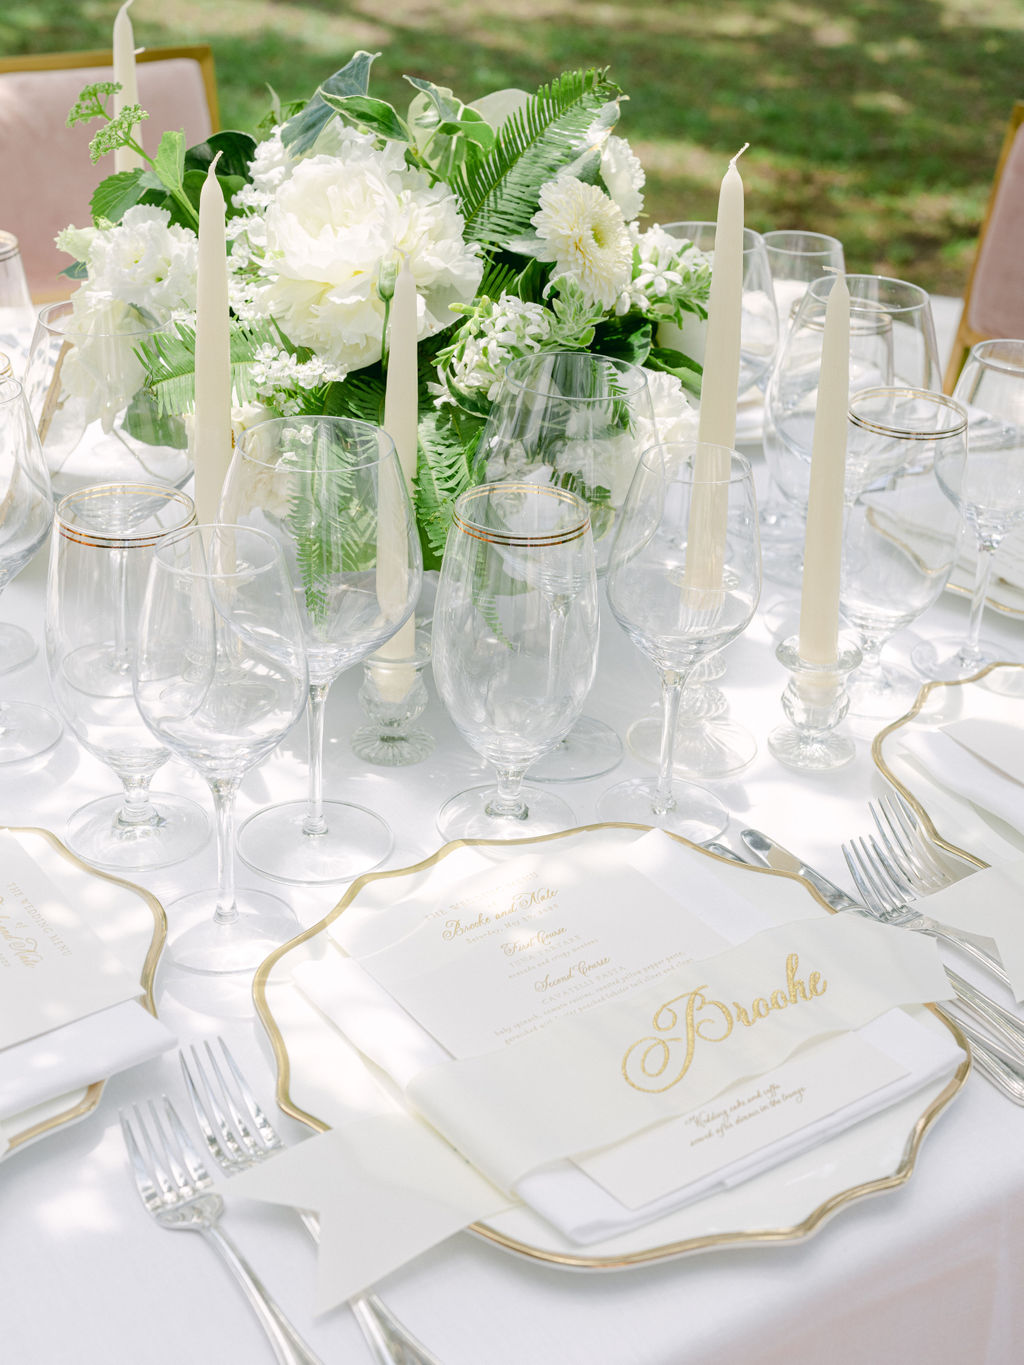 A table setting for a wedding in the Lowcountry planned and executed by Tara Guérard Soirée.